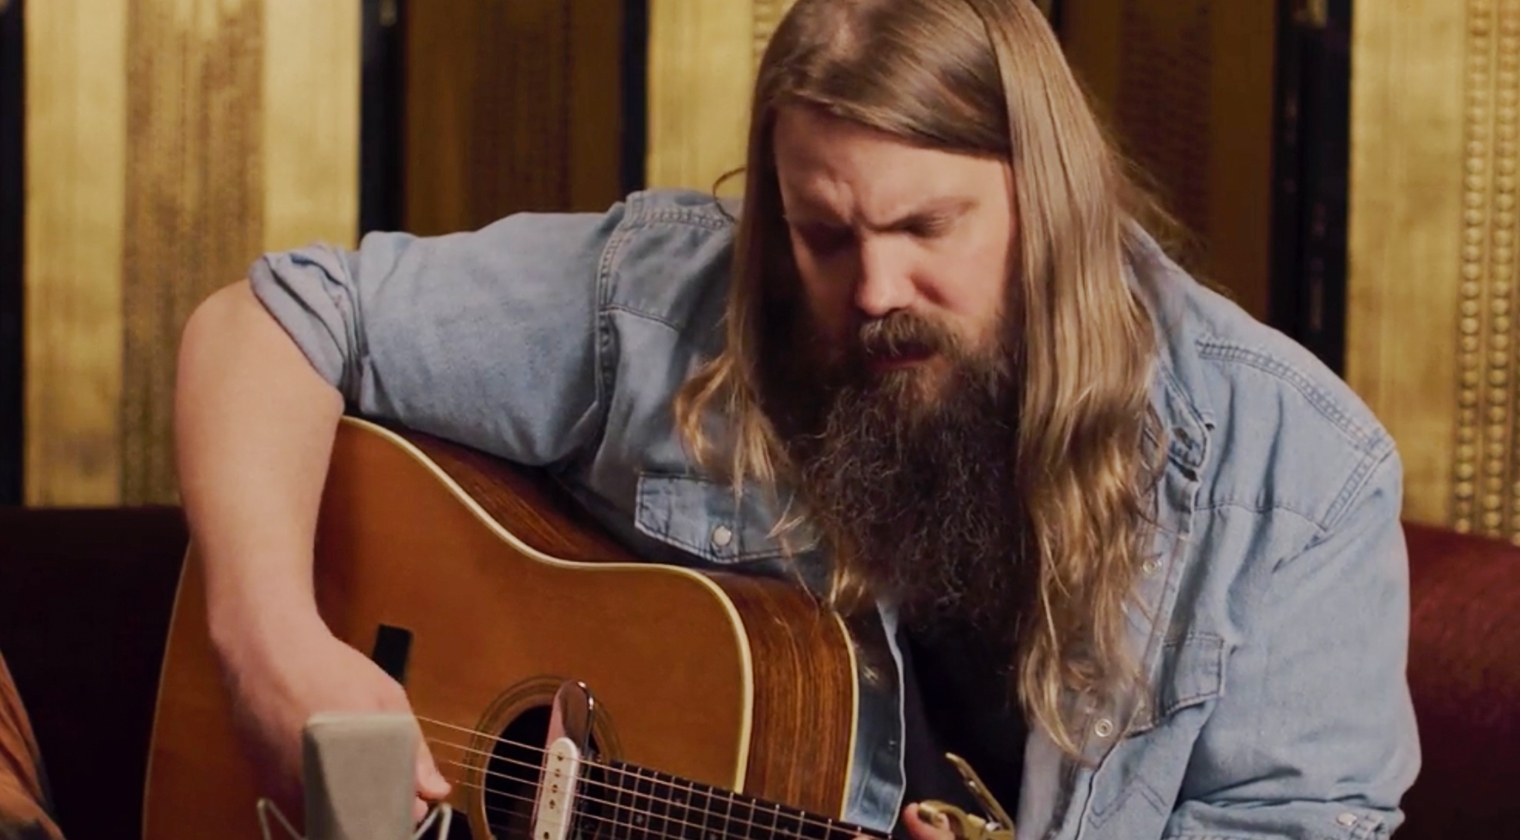 Chris Stapleton Gives Spine-Tingling Cover Of “I Hope You Dance” [Video]